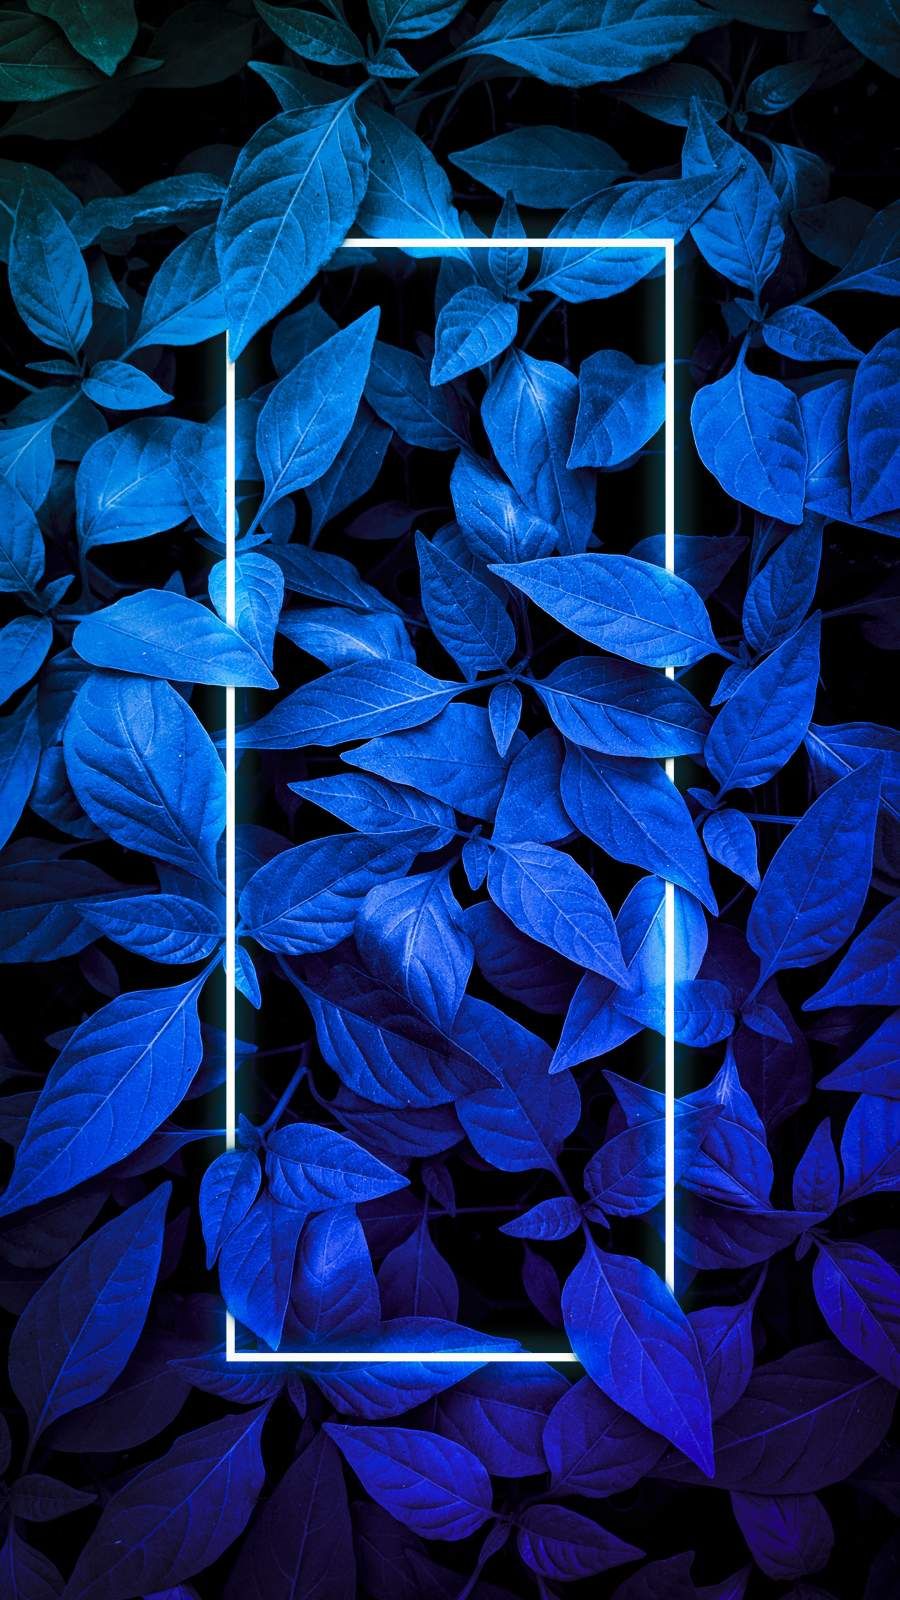 iPhone Wallpaper for iPhone iPhone iPhone X, iPhone XR, iPhone 8 Plus High Quality. iPhone wallpaper photo, Neon light wallpaper, Blue wallpaper iphone